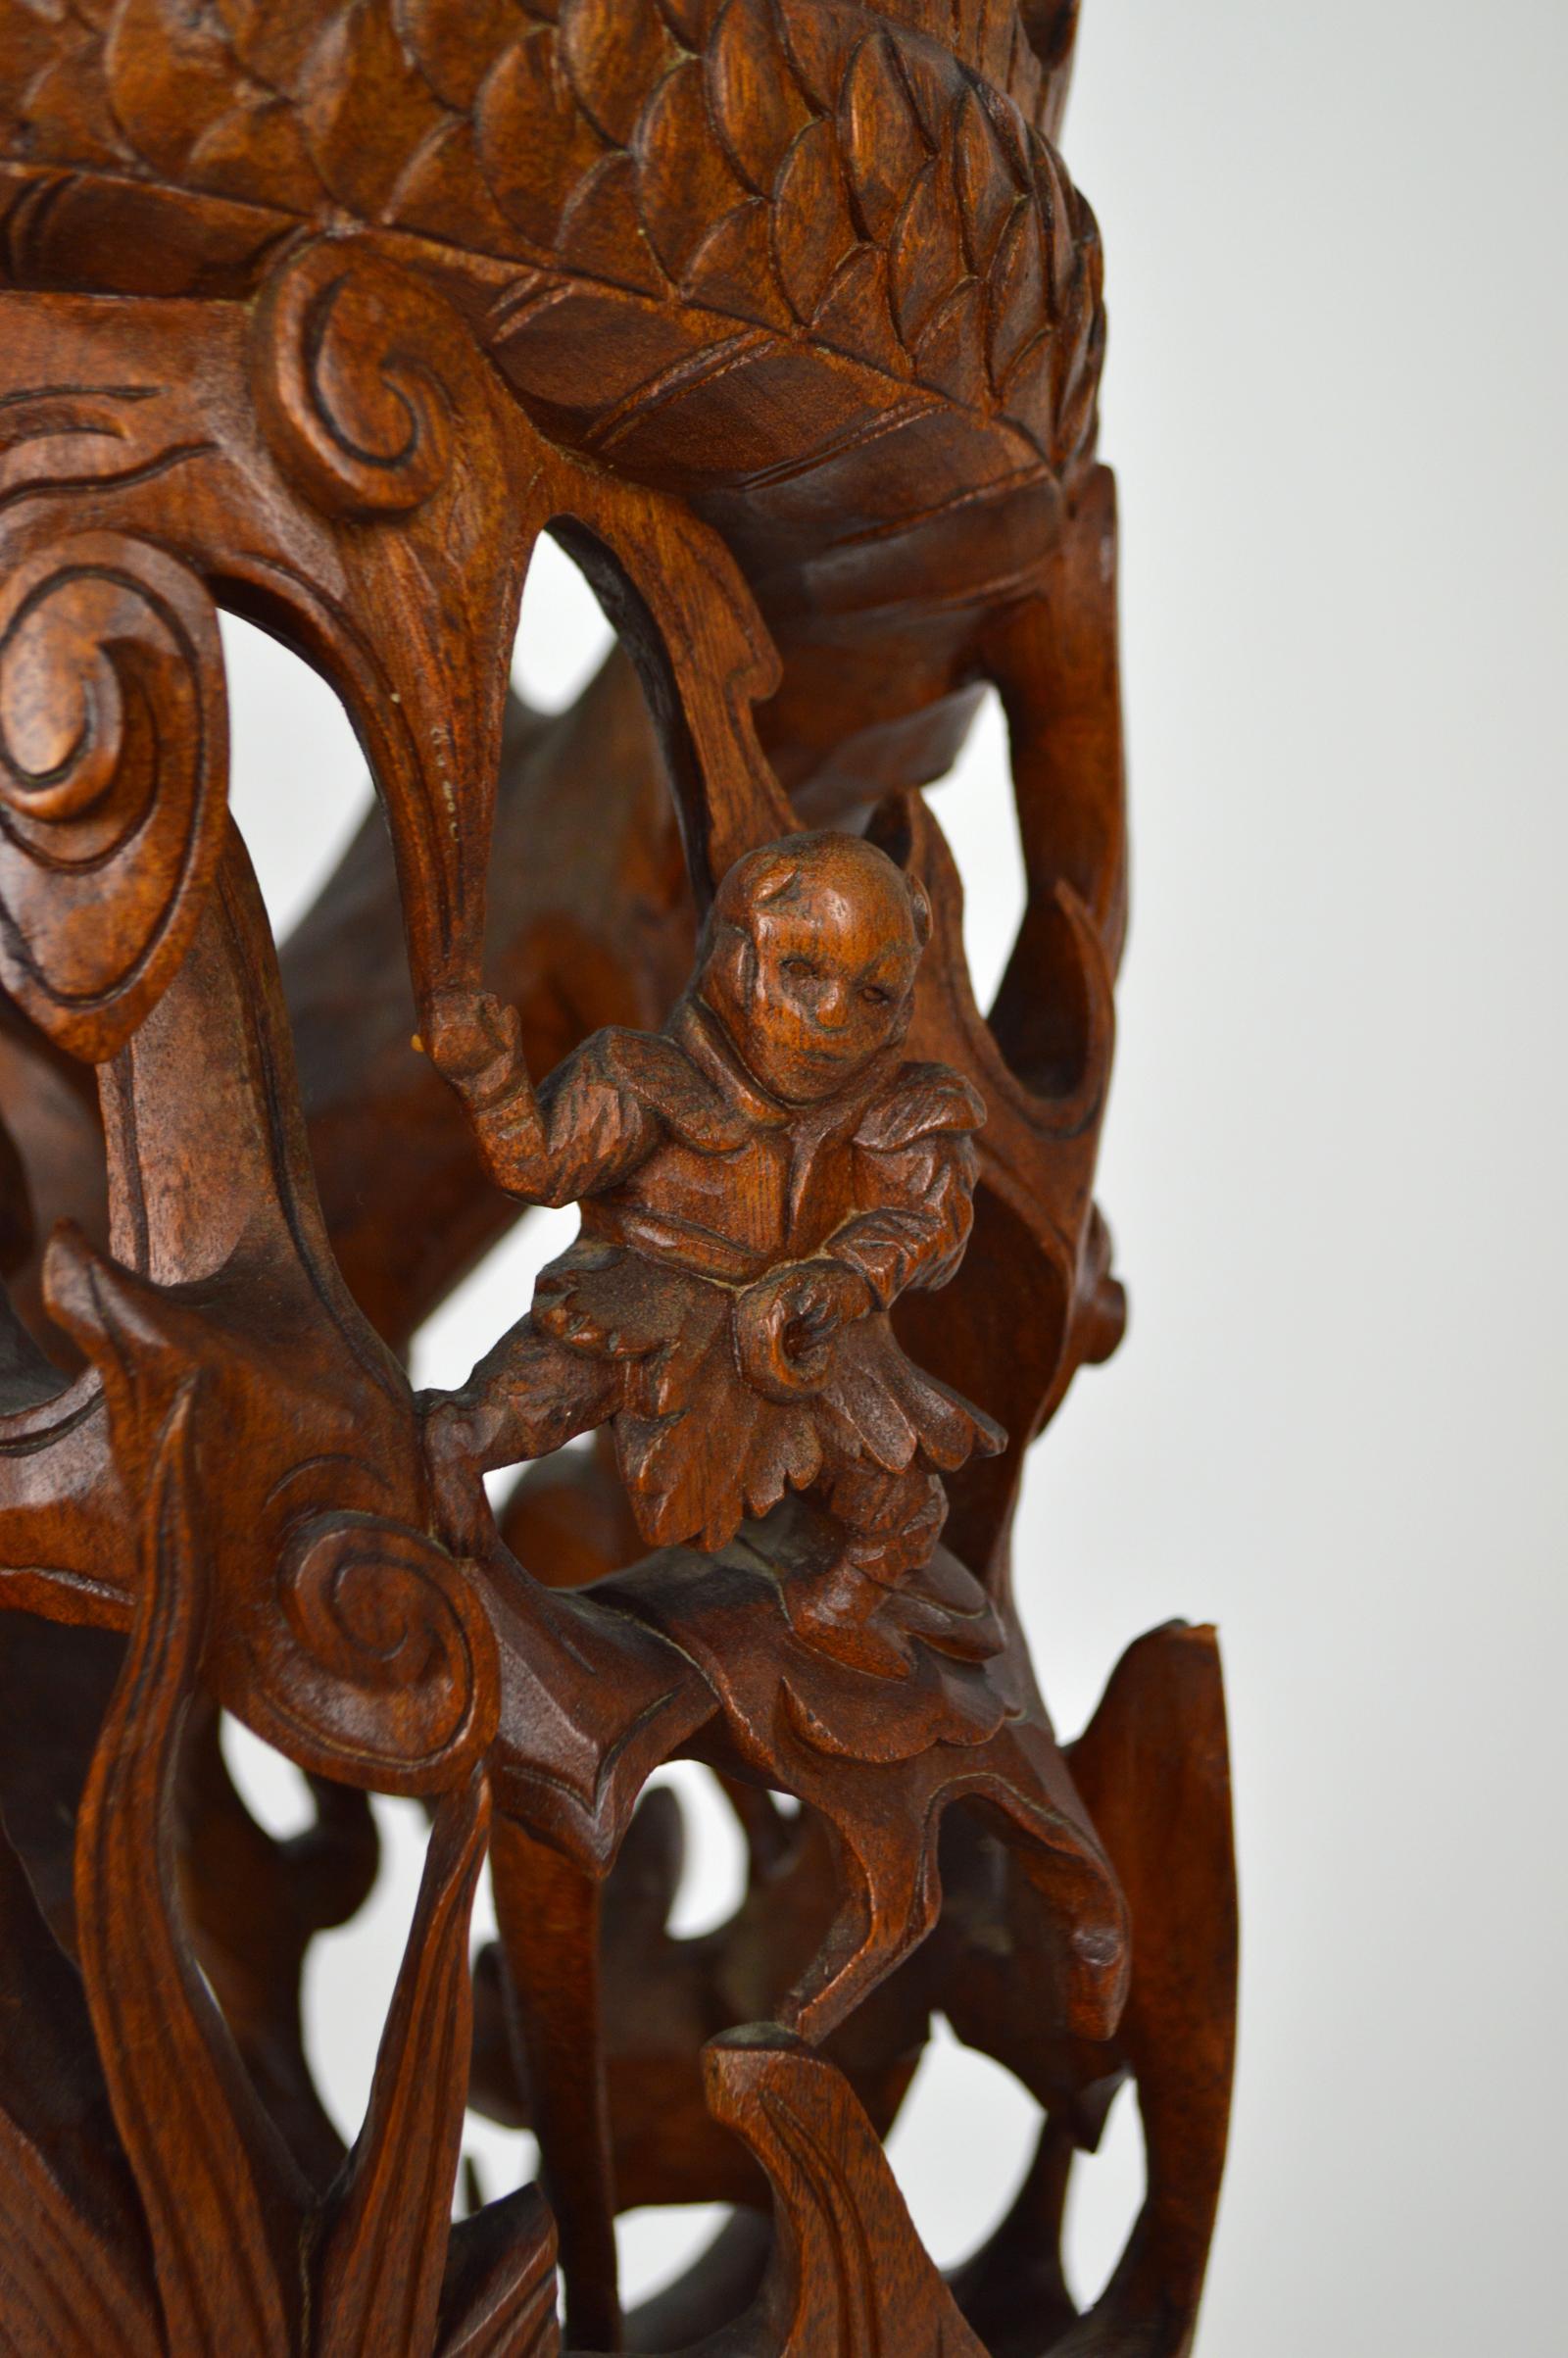 Indochinese Pedestal Table / Pot Stand in Carved Wood, Mythological Theme, 1890s For Sale 10